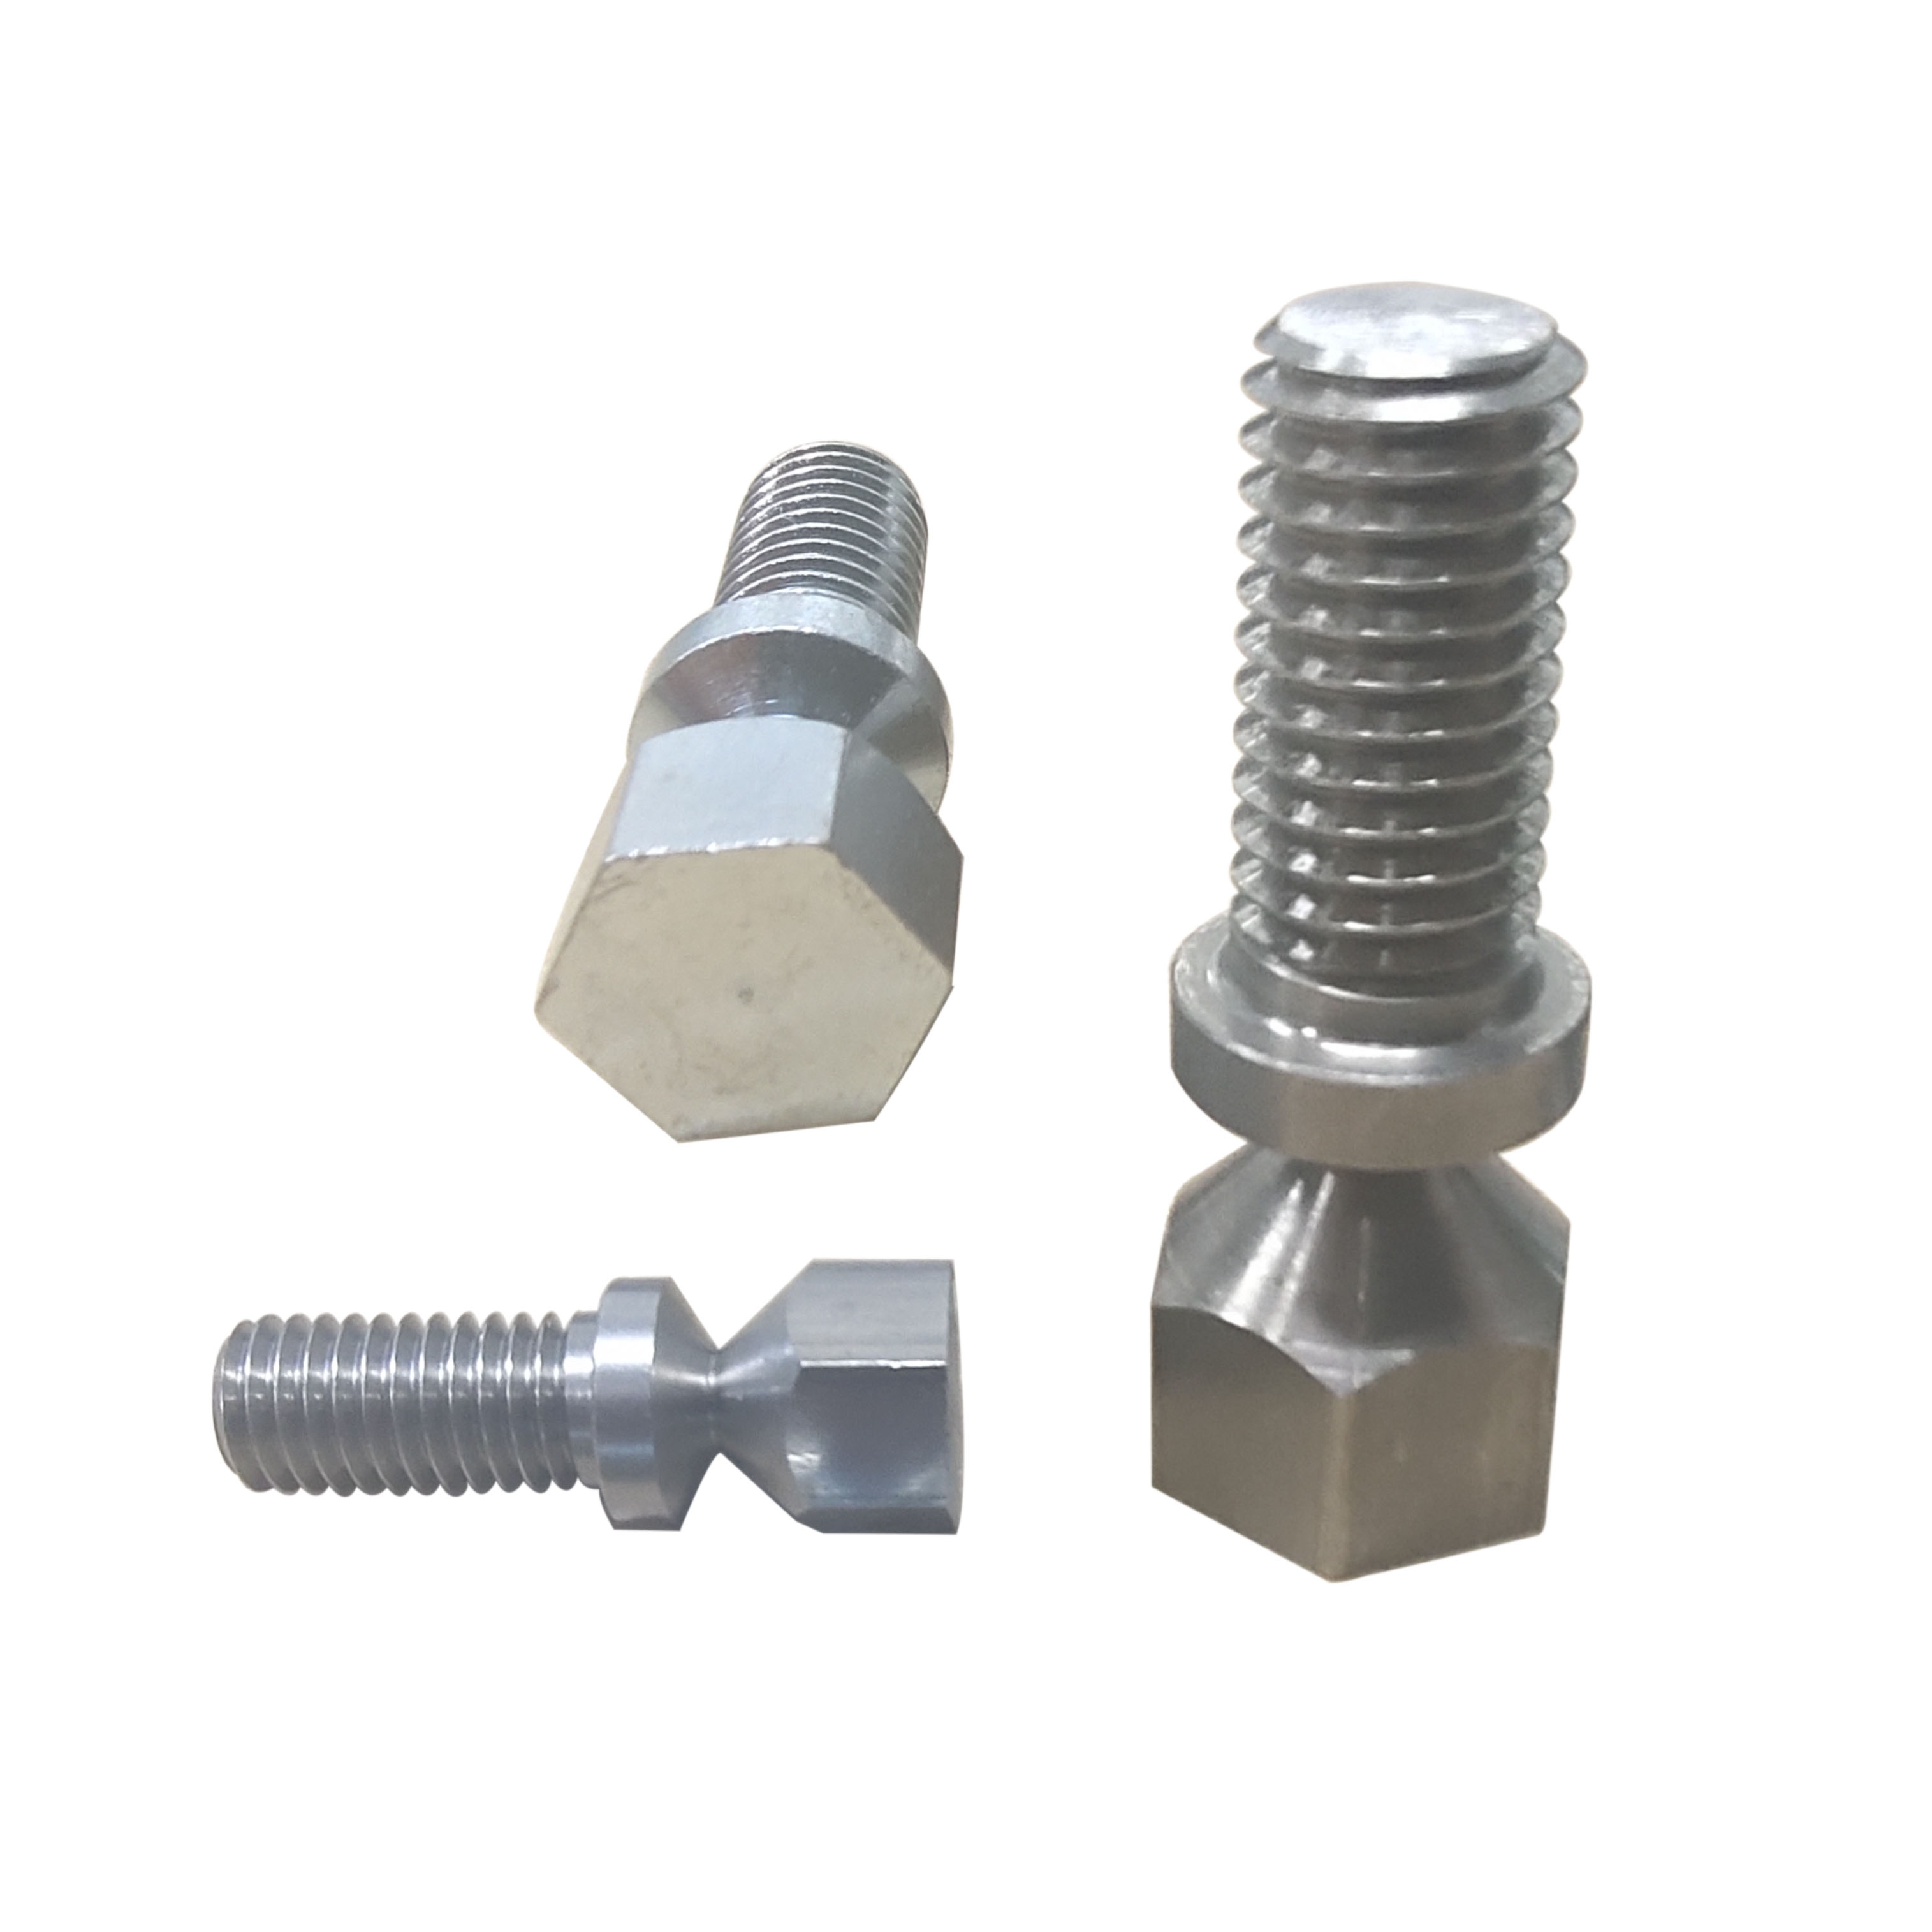 Custom Non-standard 304 Stainless Steel Zinc Plated Safety Bolt Button Head Breakaway Snap Off Security Shear Bolts